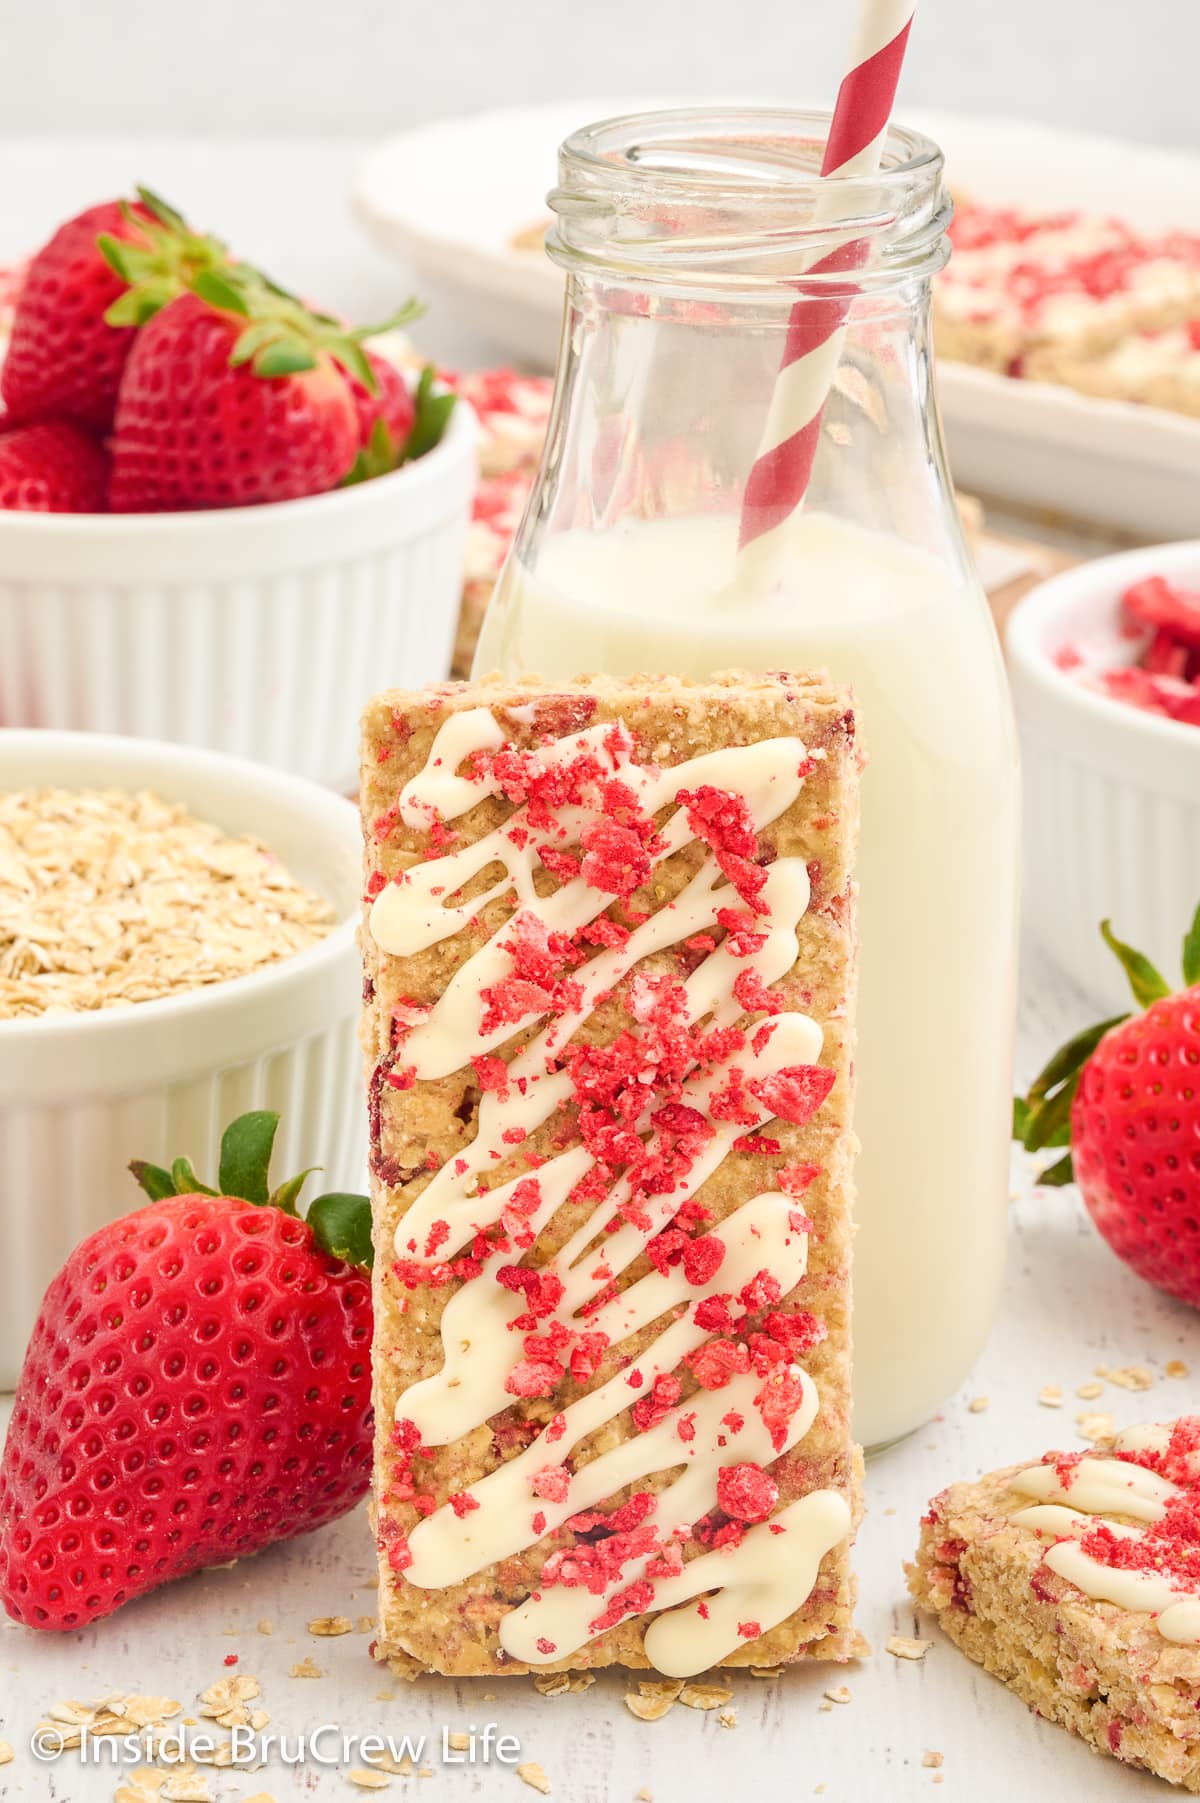 A strawberry topped granola bar standing next to a glass of milk.